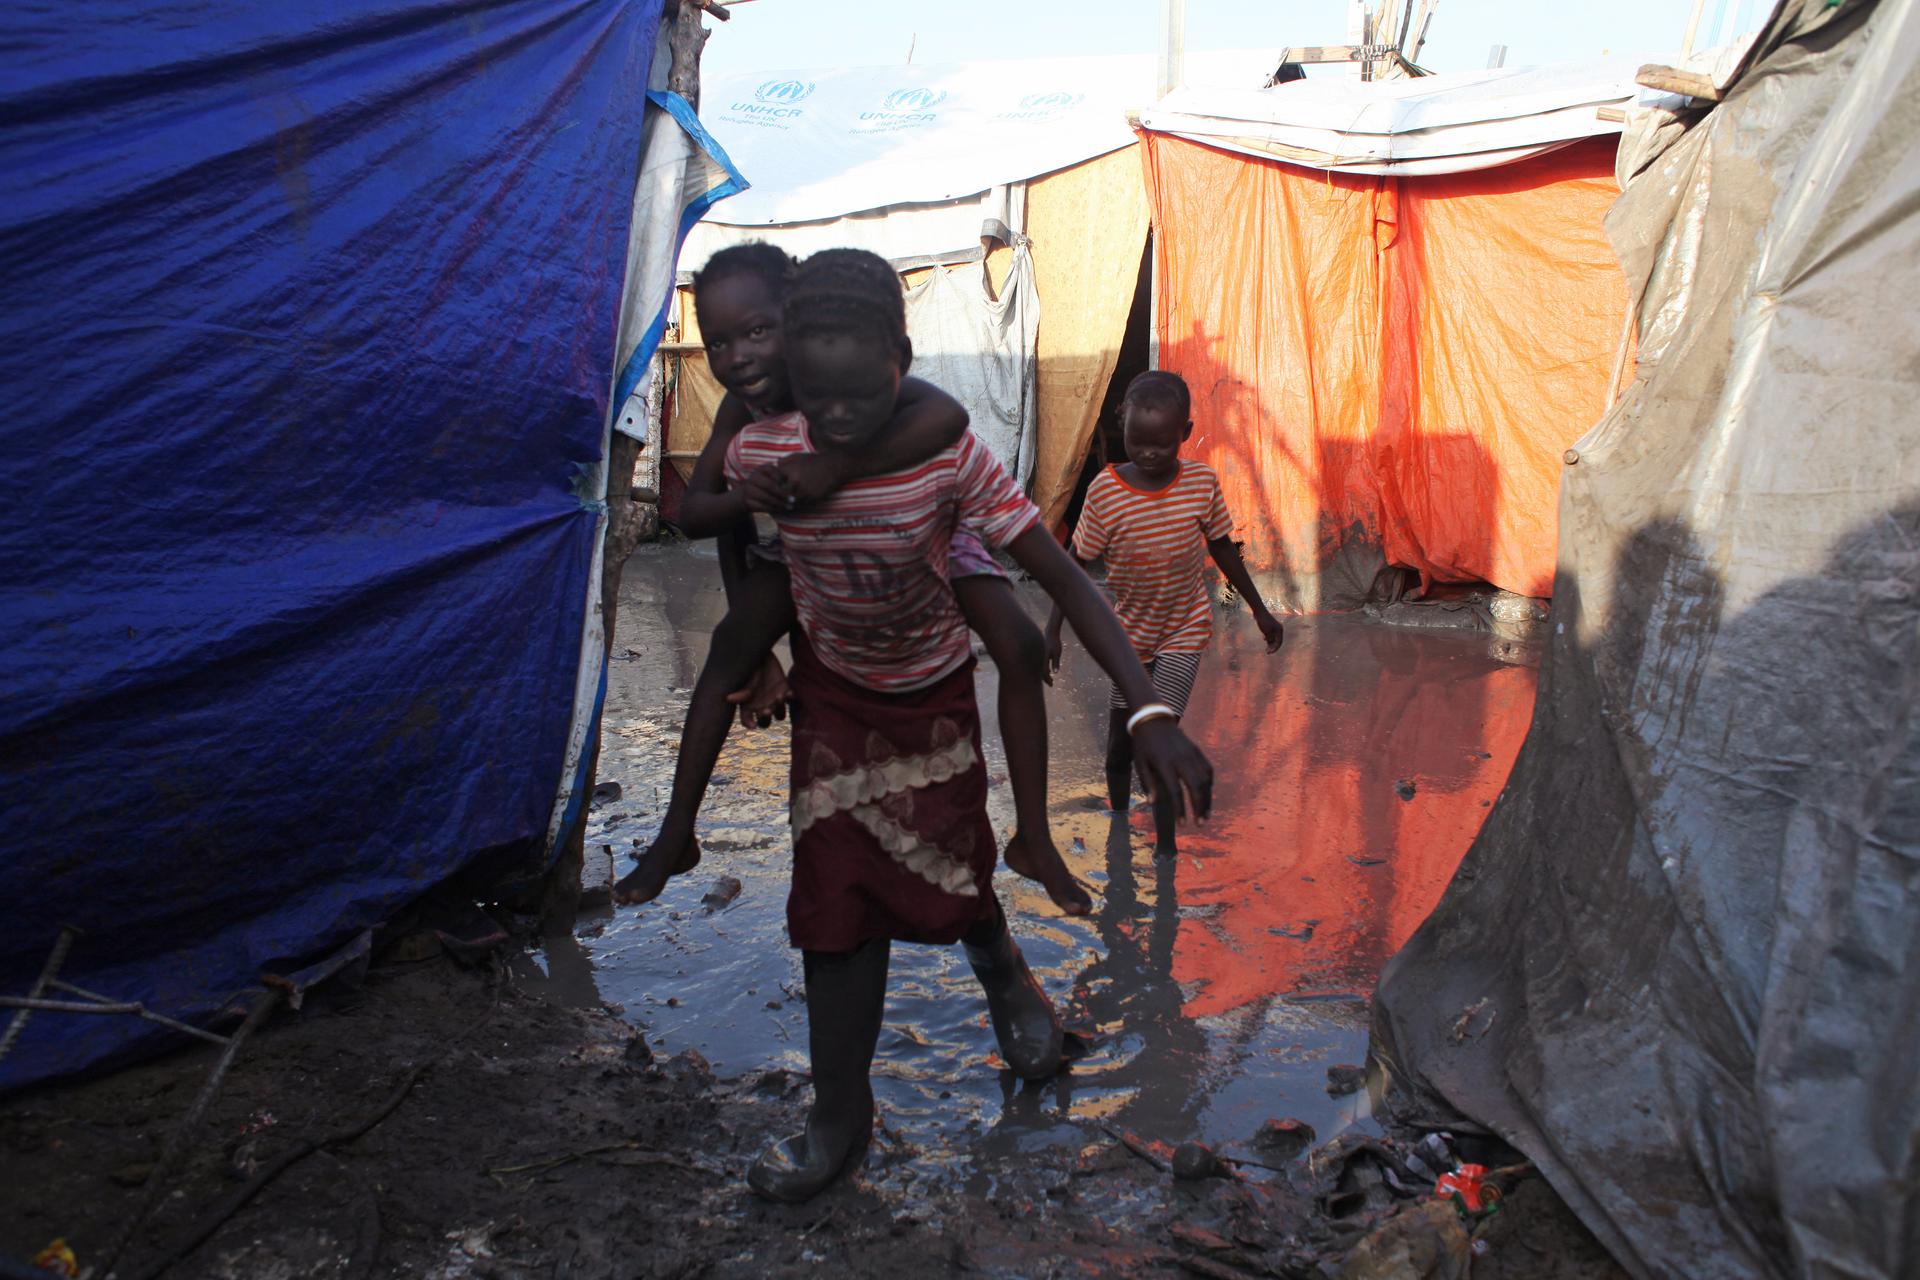 A South Sudanese girl displaced by the conflict carries a younger boy on her back as they walk through mud in a flooded camp for internally displaced people at the UNMISS base in Malakal, Upper Nile State May 30, 2014. There are about 18,000 people shelte